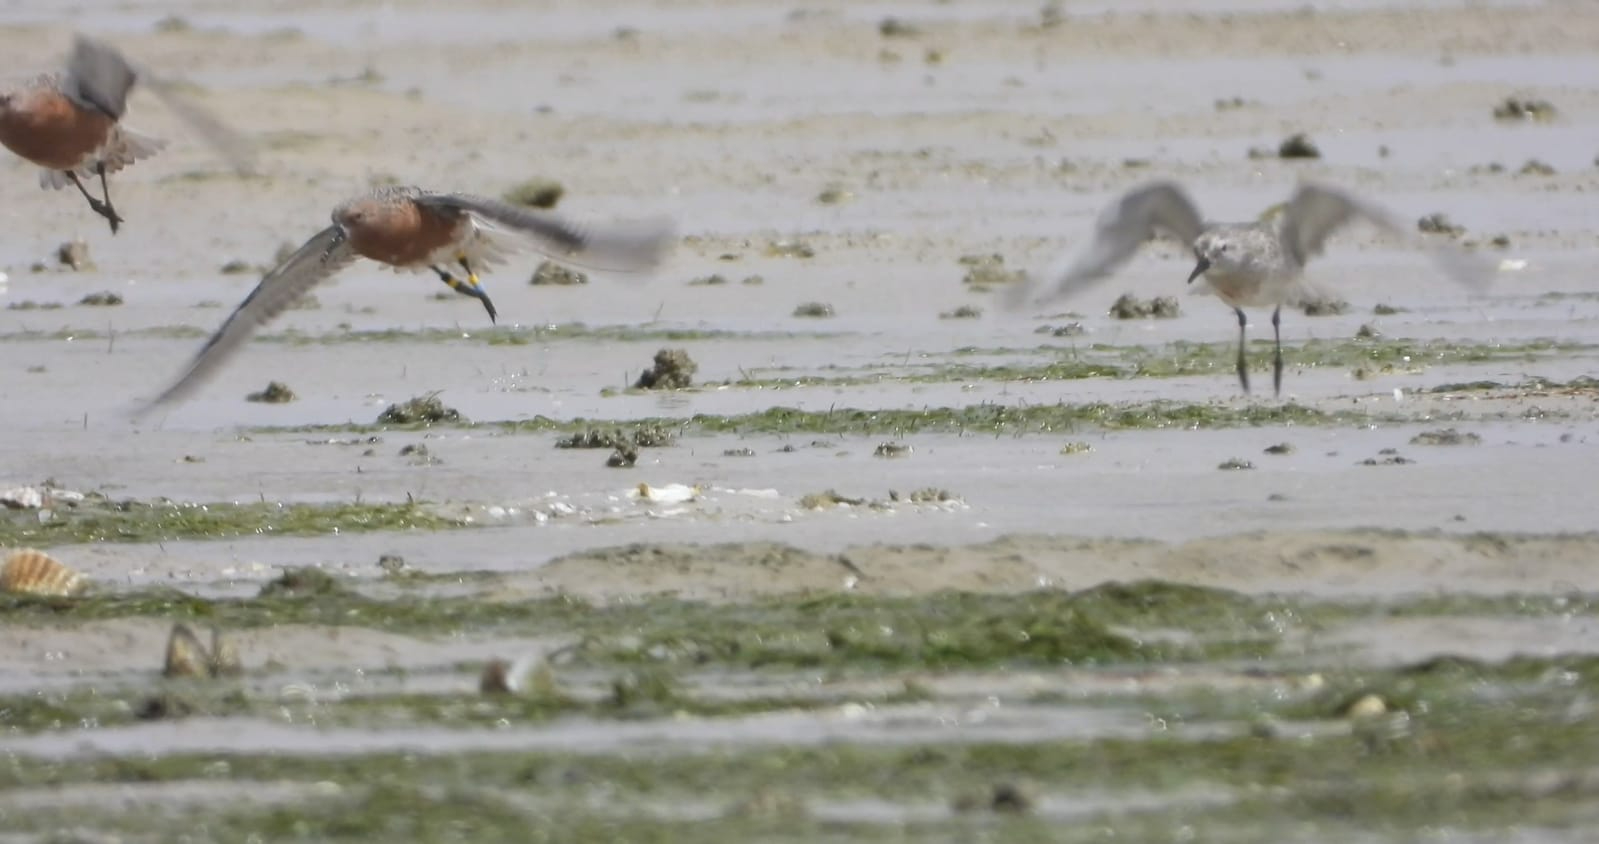 We found back and filmed two satellite-tagged red knots on the mudflats between Tidra and Gibena. Photo: Tim Oortwijn